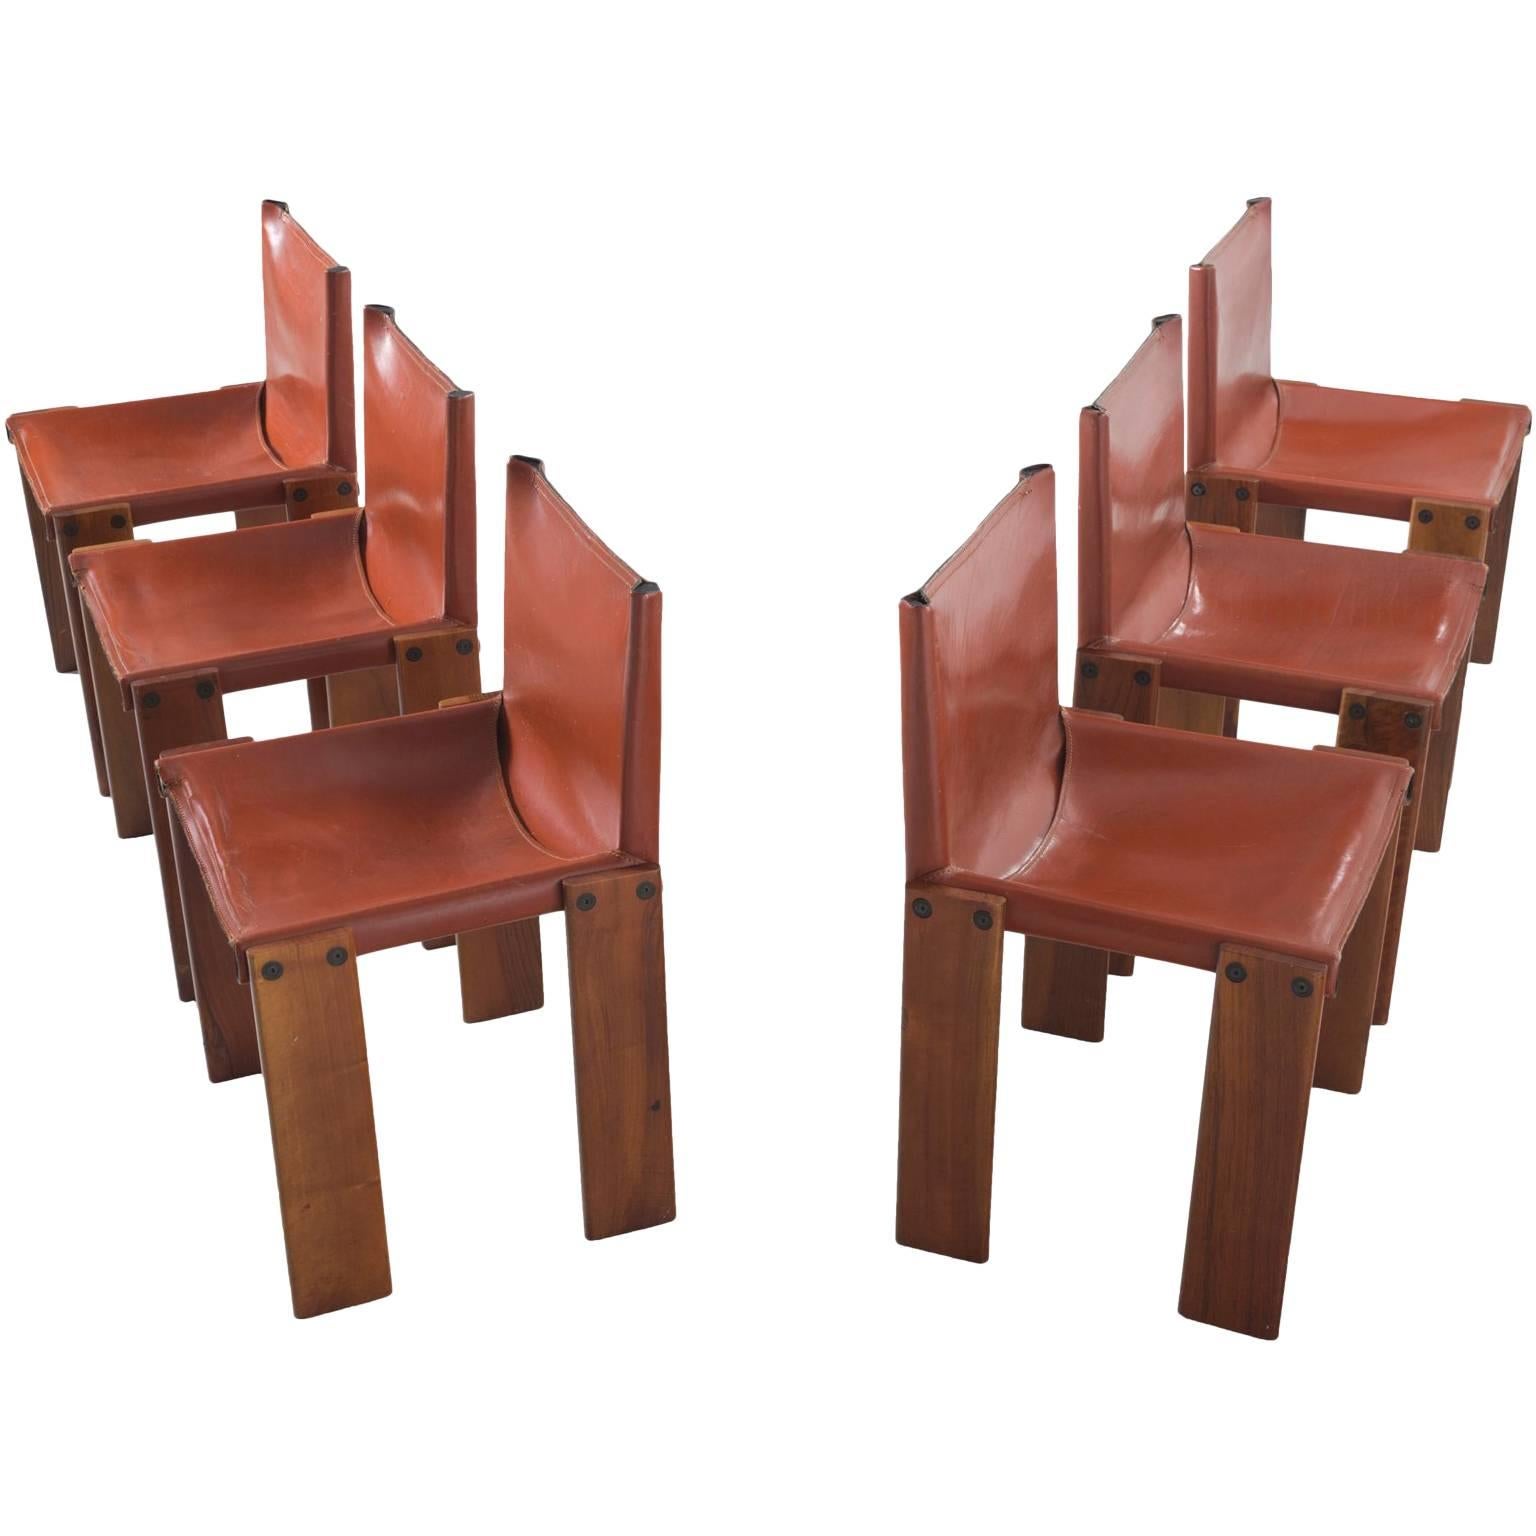 Scarpa Monk Chairs in Sienna Red Leather and Oak